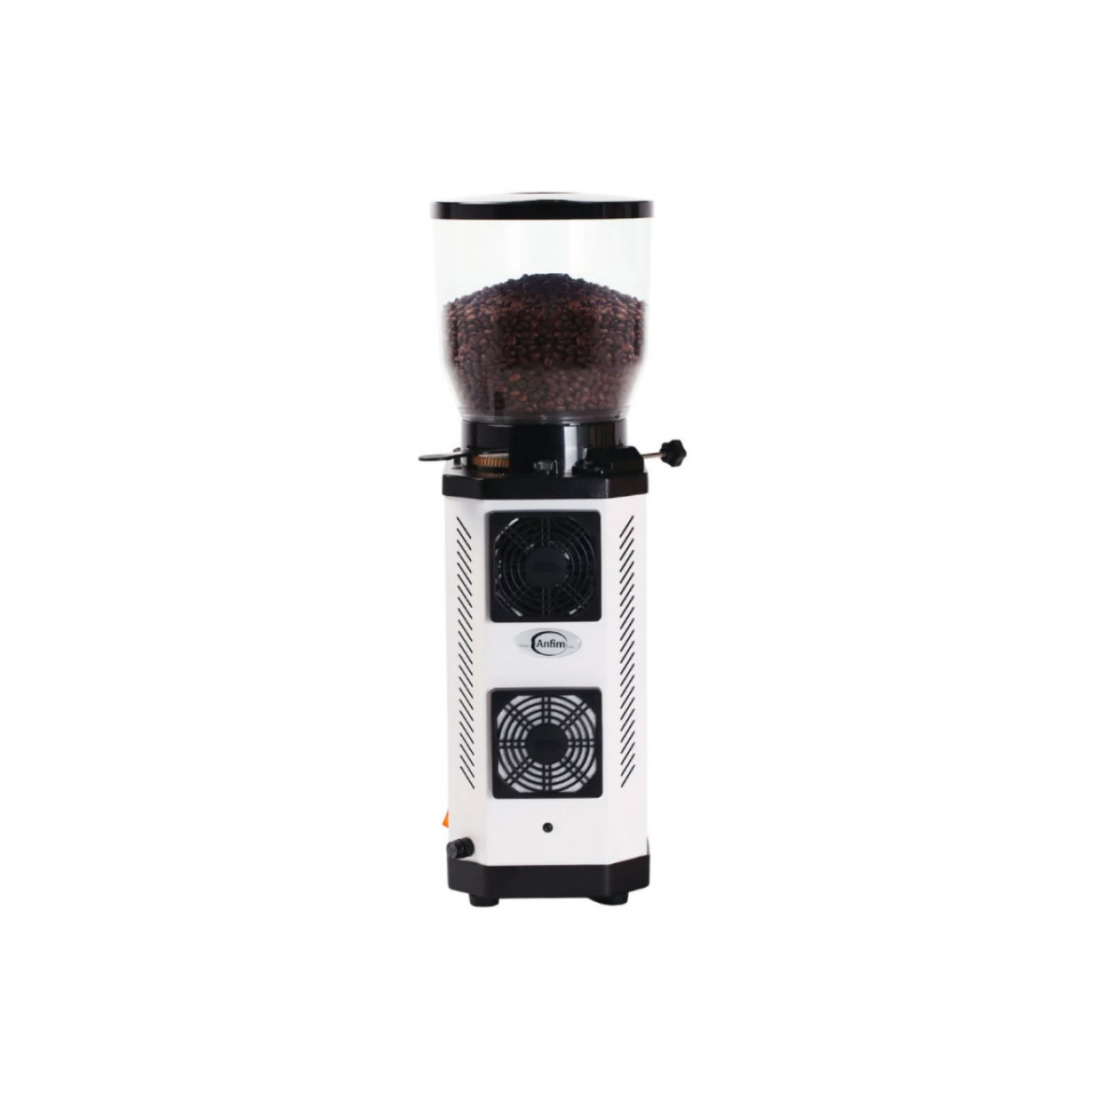 Anfim ,SP-II, Special Performance On-Demand Stepless Espresso Grinder, 75 mm Burrs white|mkayn|مكاين